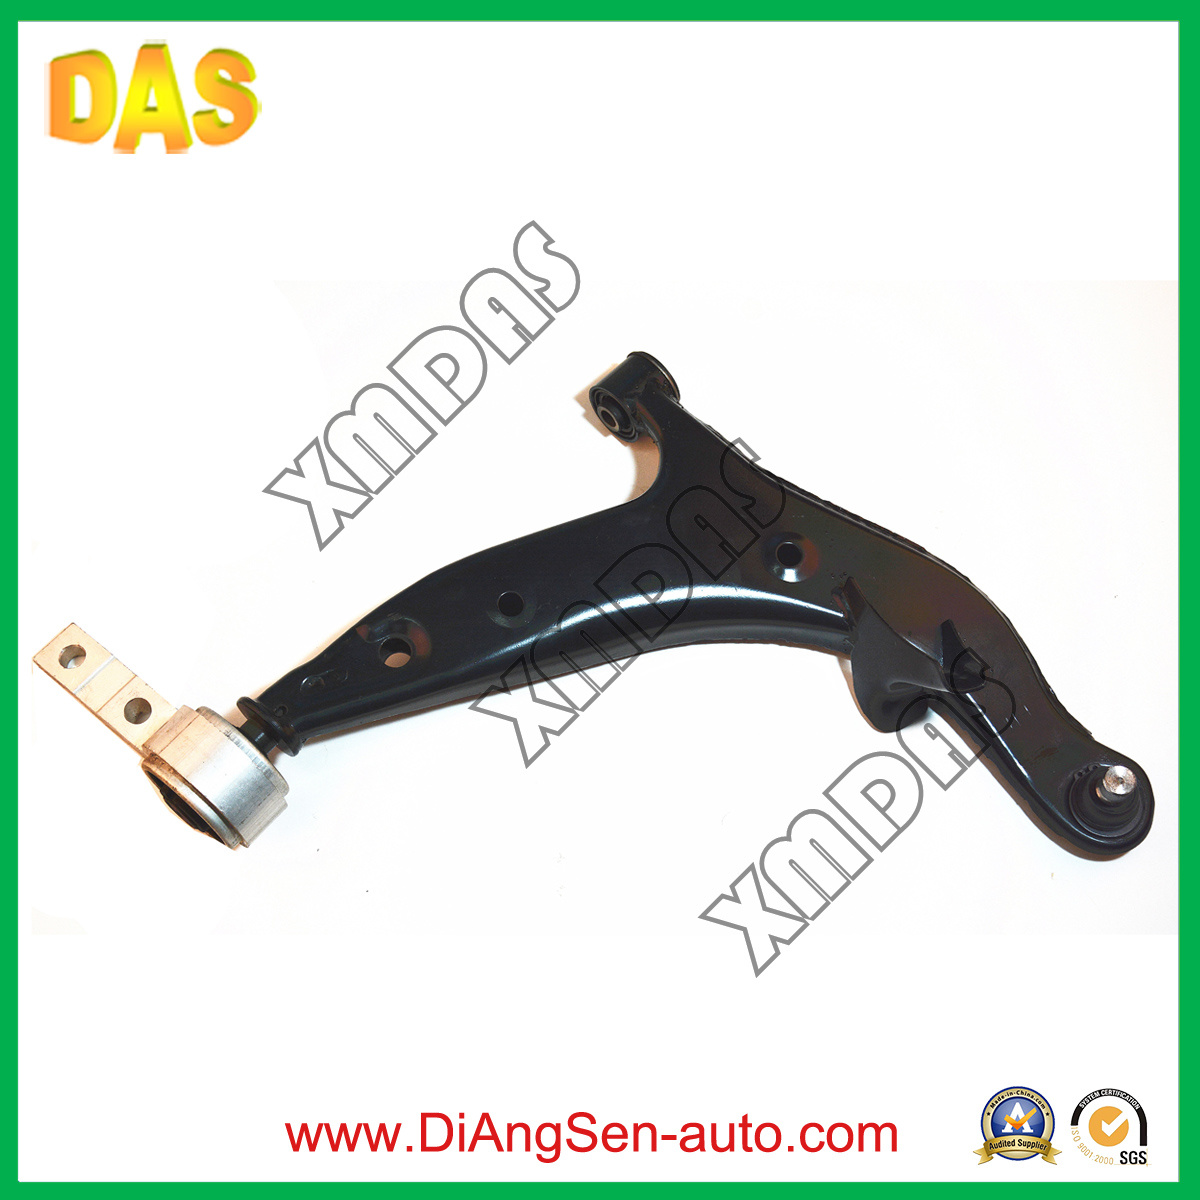 Front Axle Lower Control Arm for Nissan Quest (54500-CK000, 54501-CK000)